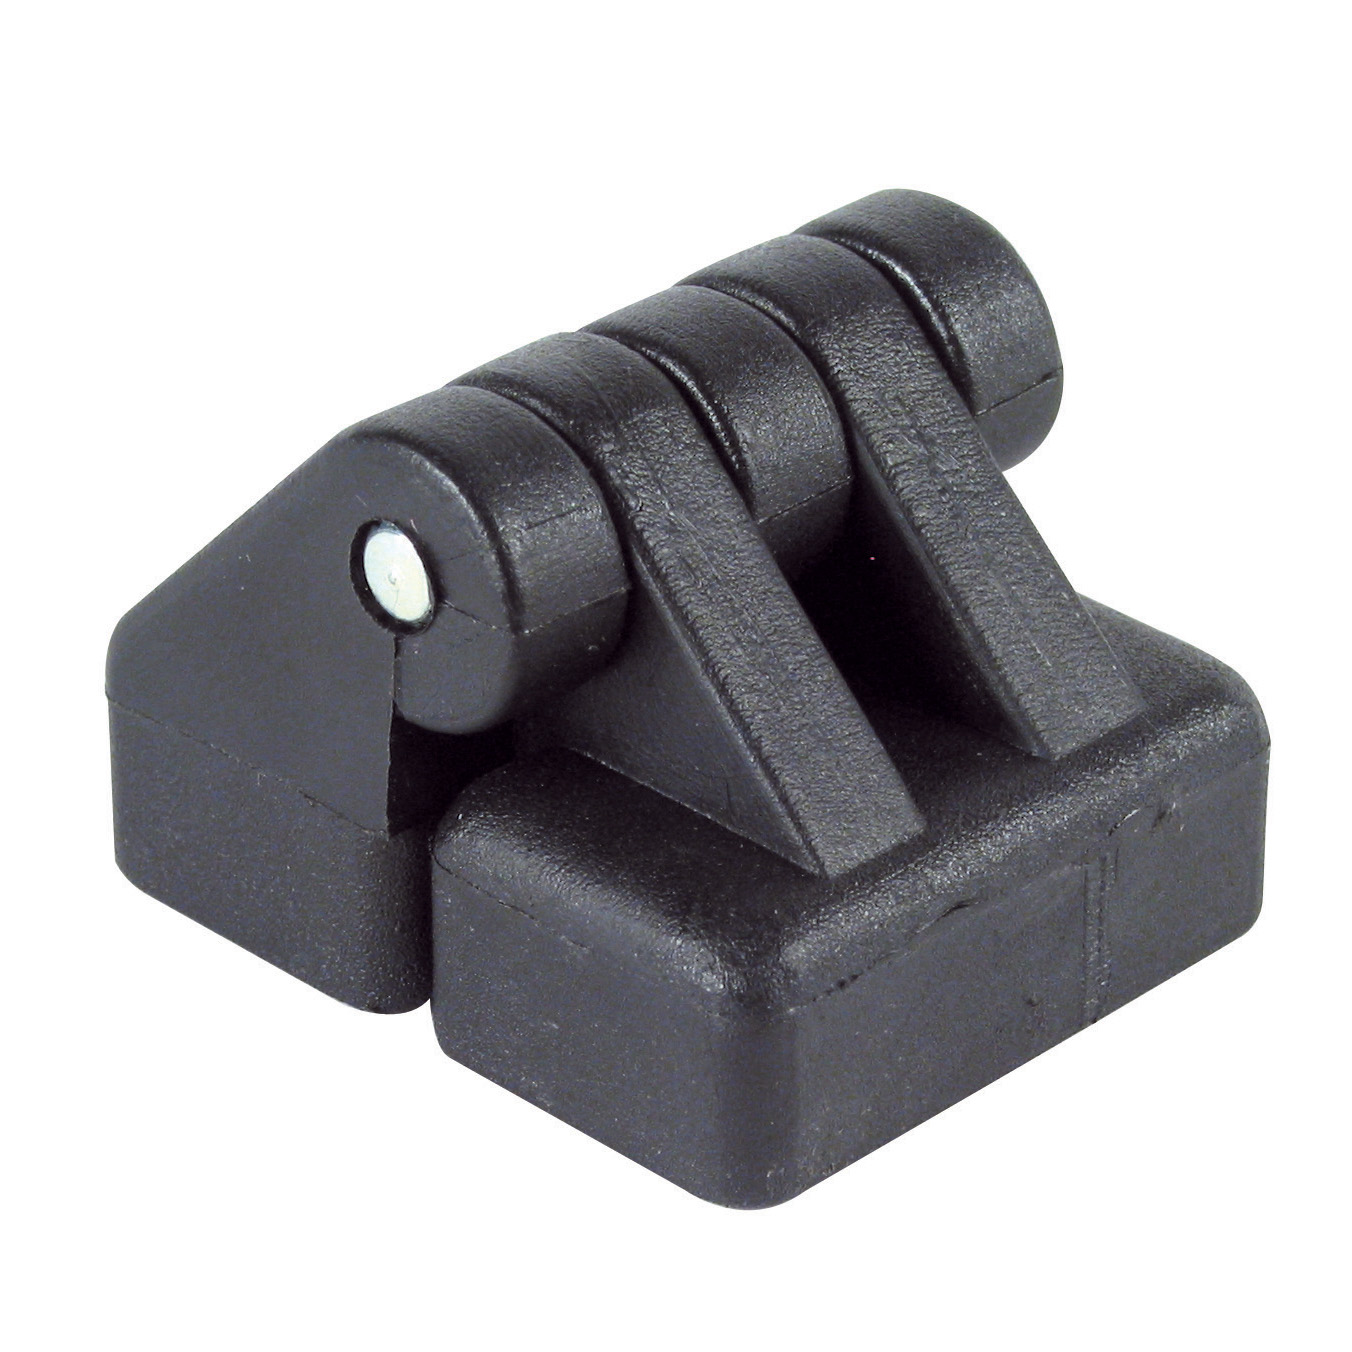 Screwed hinge with threaded insert - 225 degrees -  - 